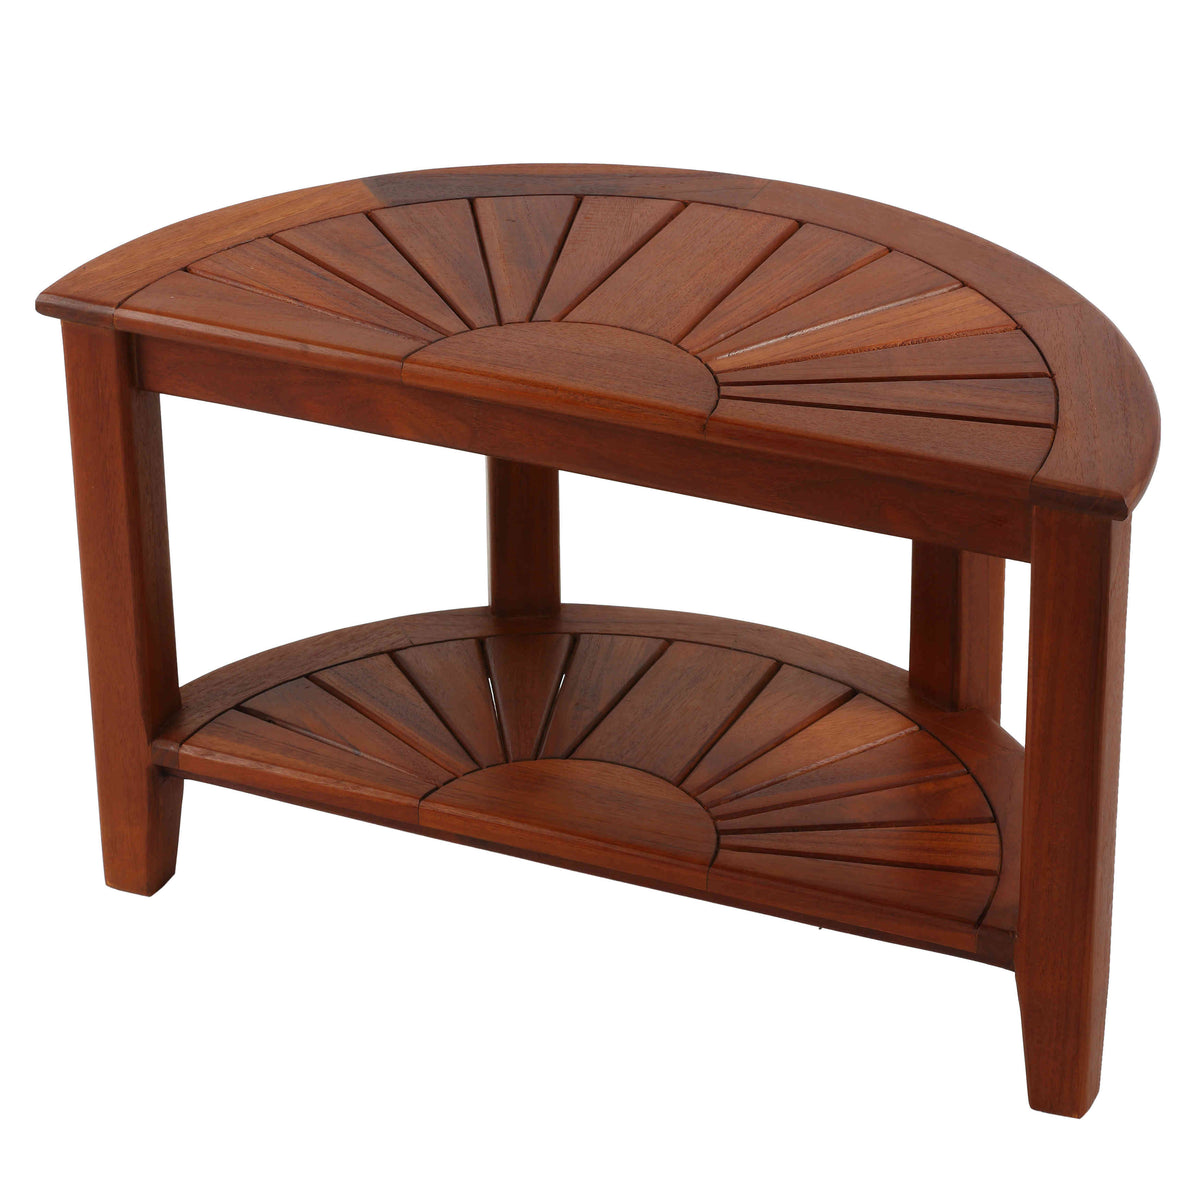 Bare Decor Chesser Half Circle Bench in Solid Teak Wood, 17&quot; High